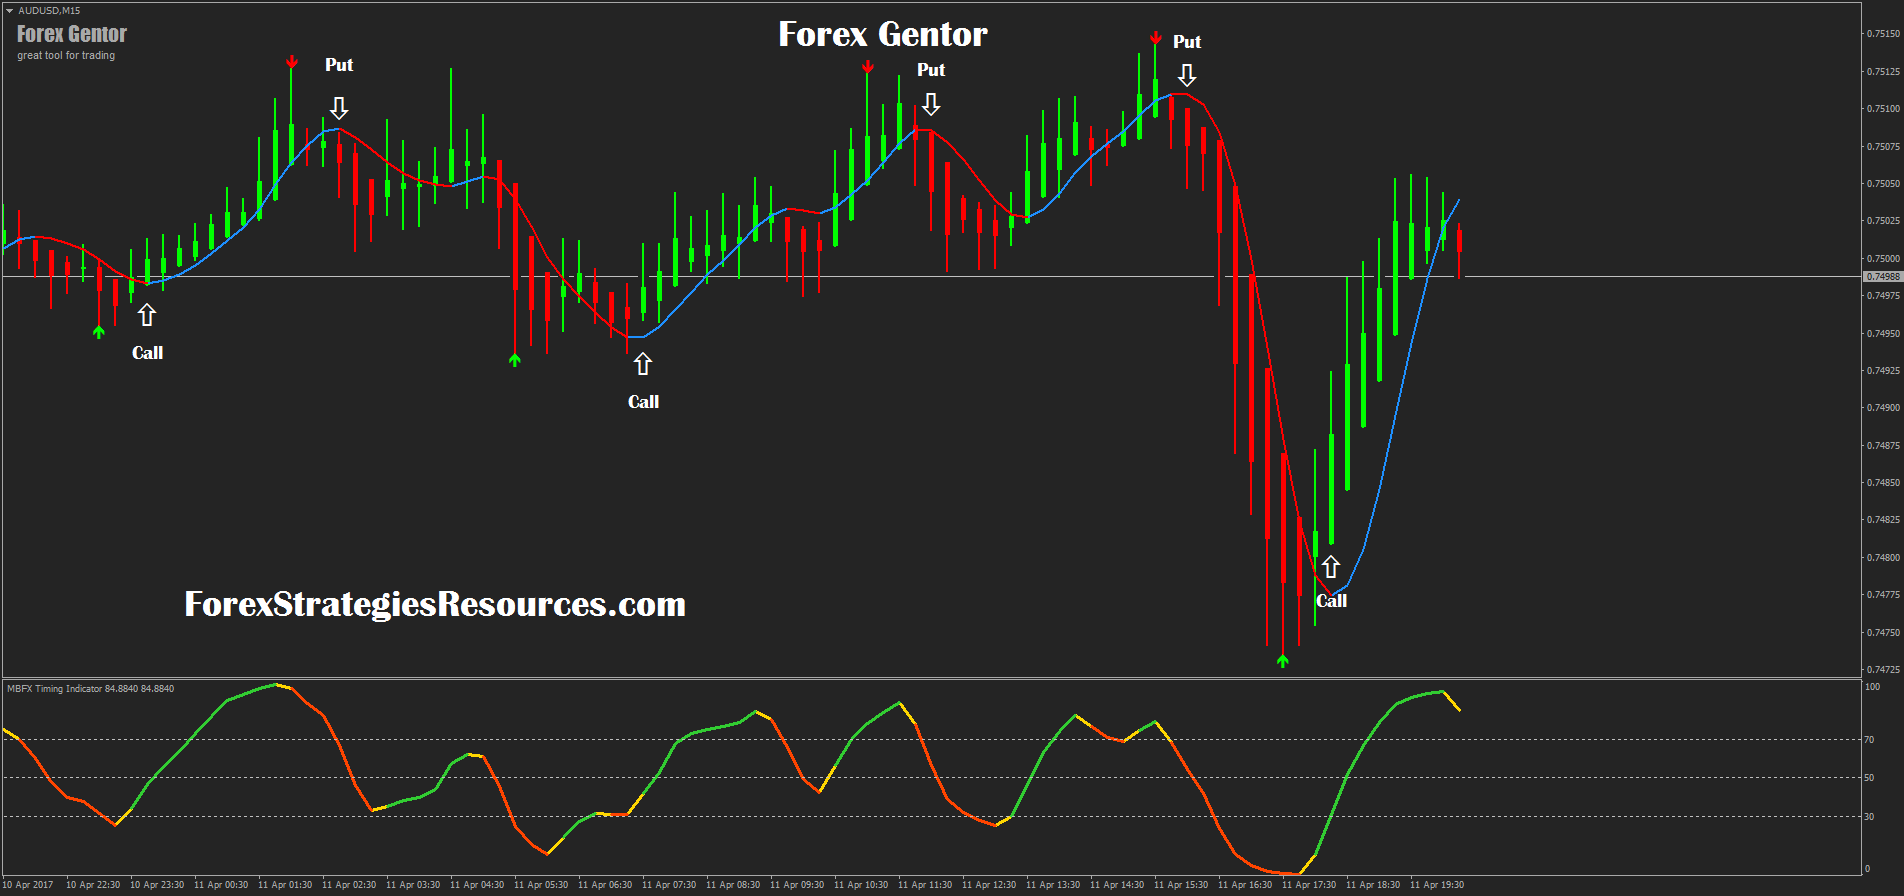 Mbfx forex sms signals coupon forex derivatives